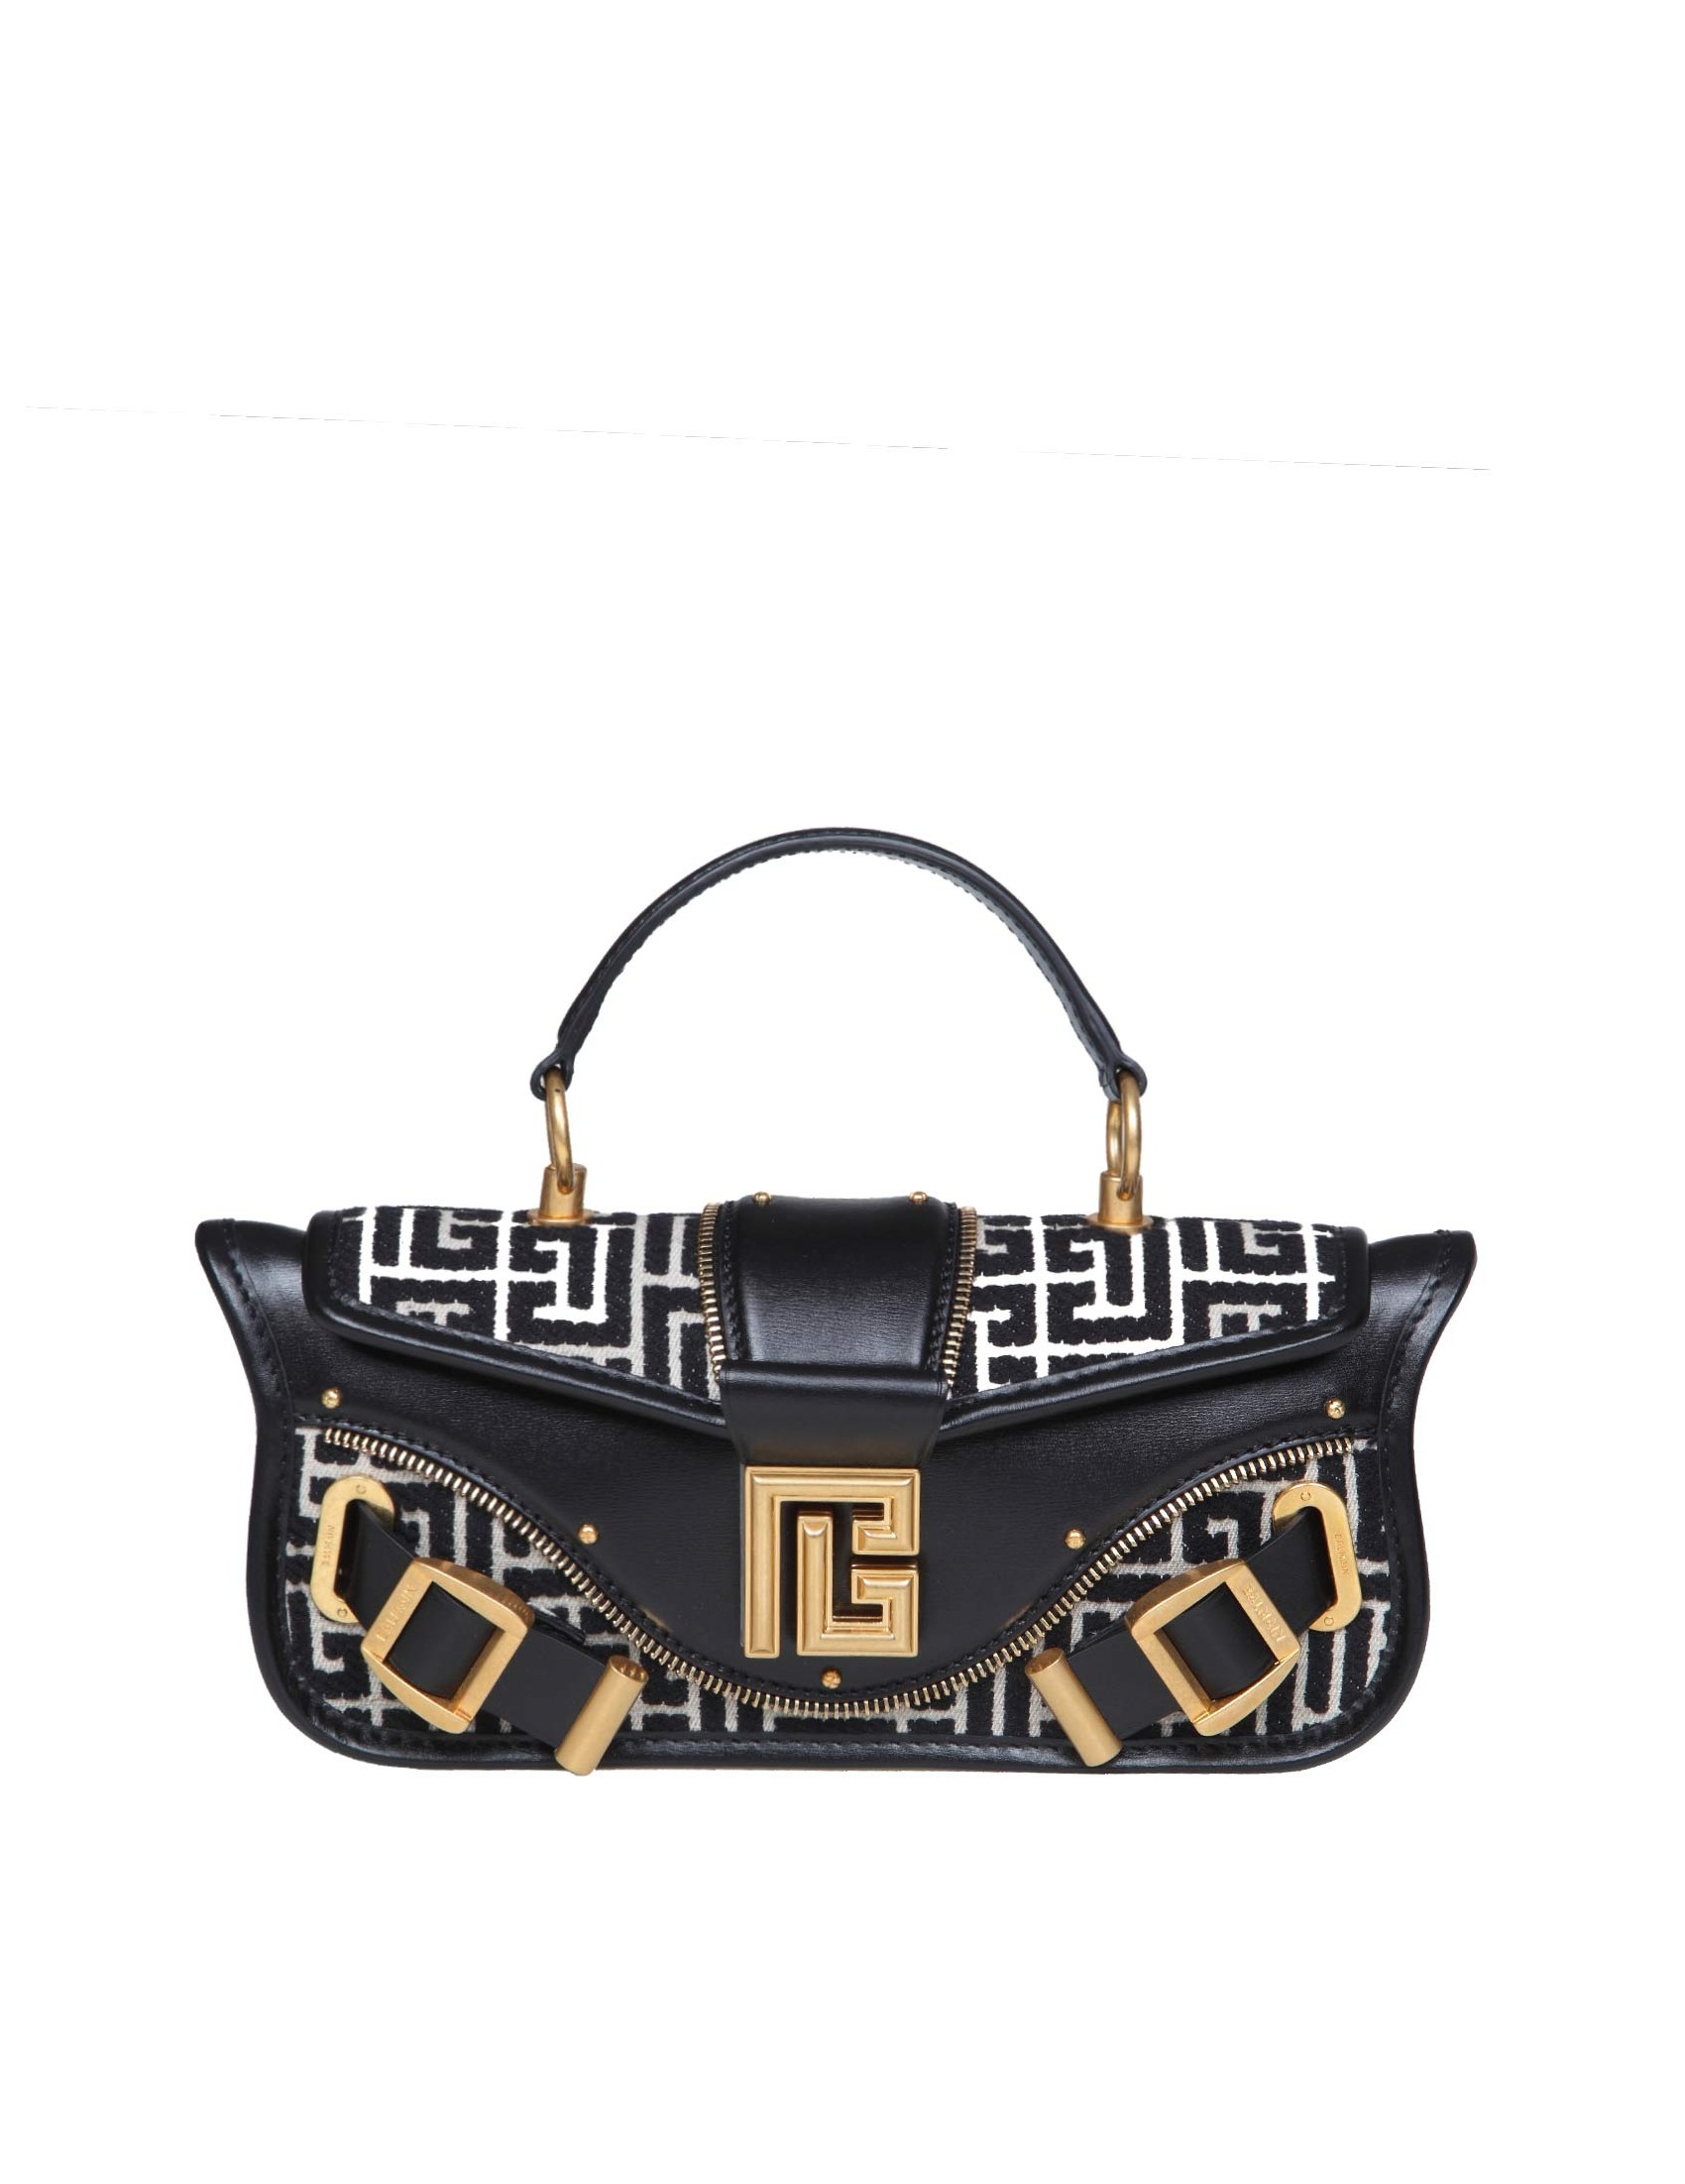 BALMAIN BAGUETTE BLAZE PIUCH-BOX IN LEATHER AND MONOGRAM FABRIC